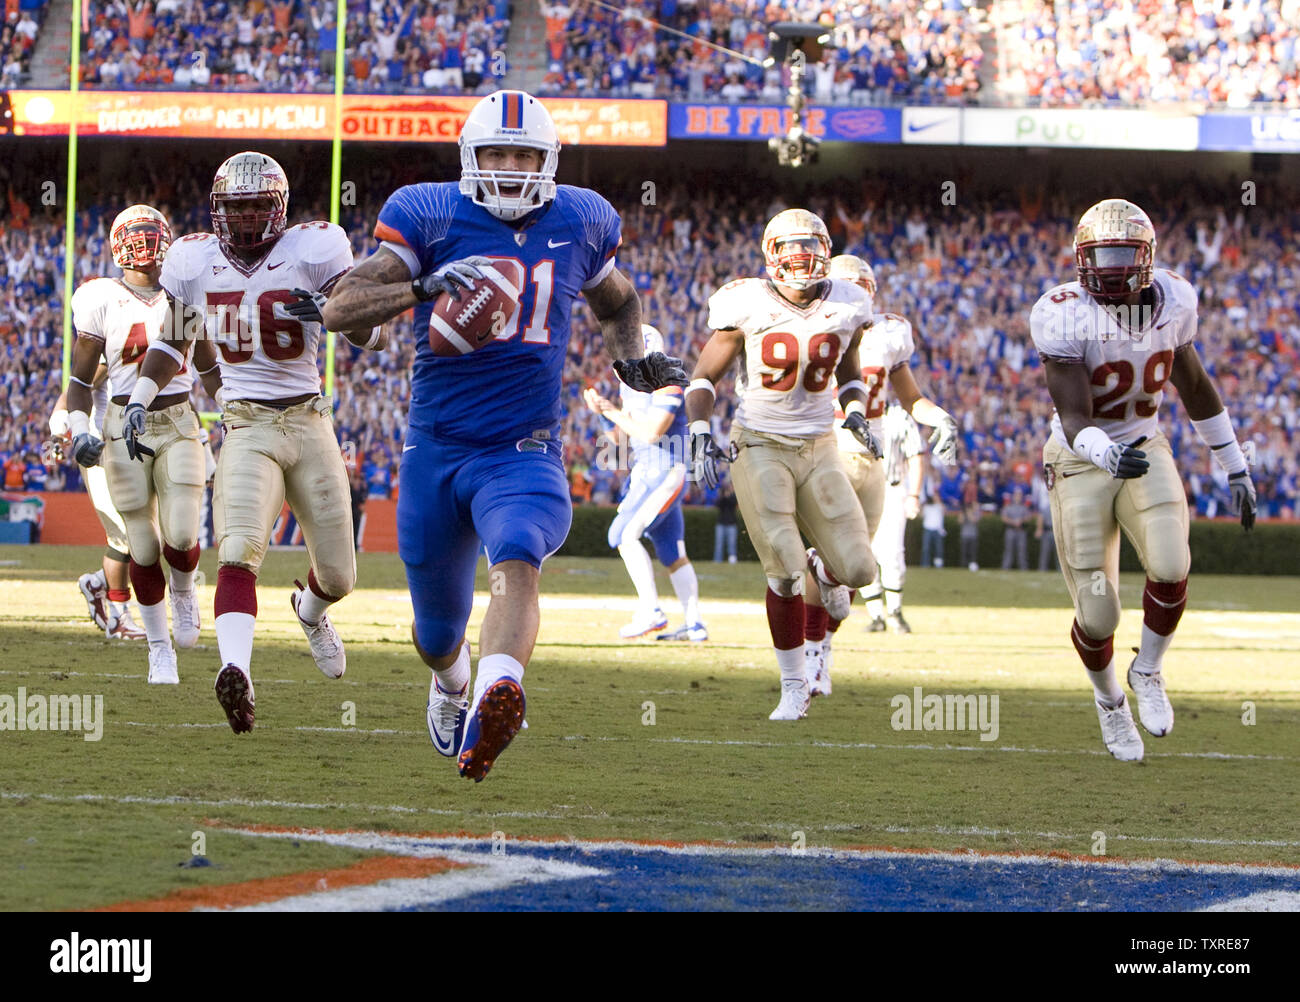 Florida Gator tight end Aaron Hernandez scores the first touchdown against the Florida State Seminoles in the first half of their NCAA football game in Gainesville, Florida November 28, 2009.  UPI/Mark Wallheiser Stock Photo